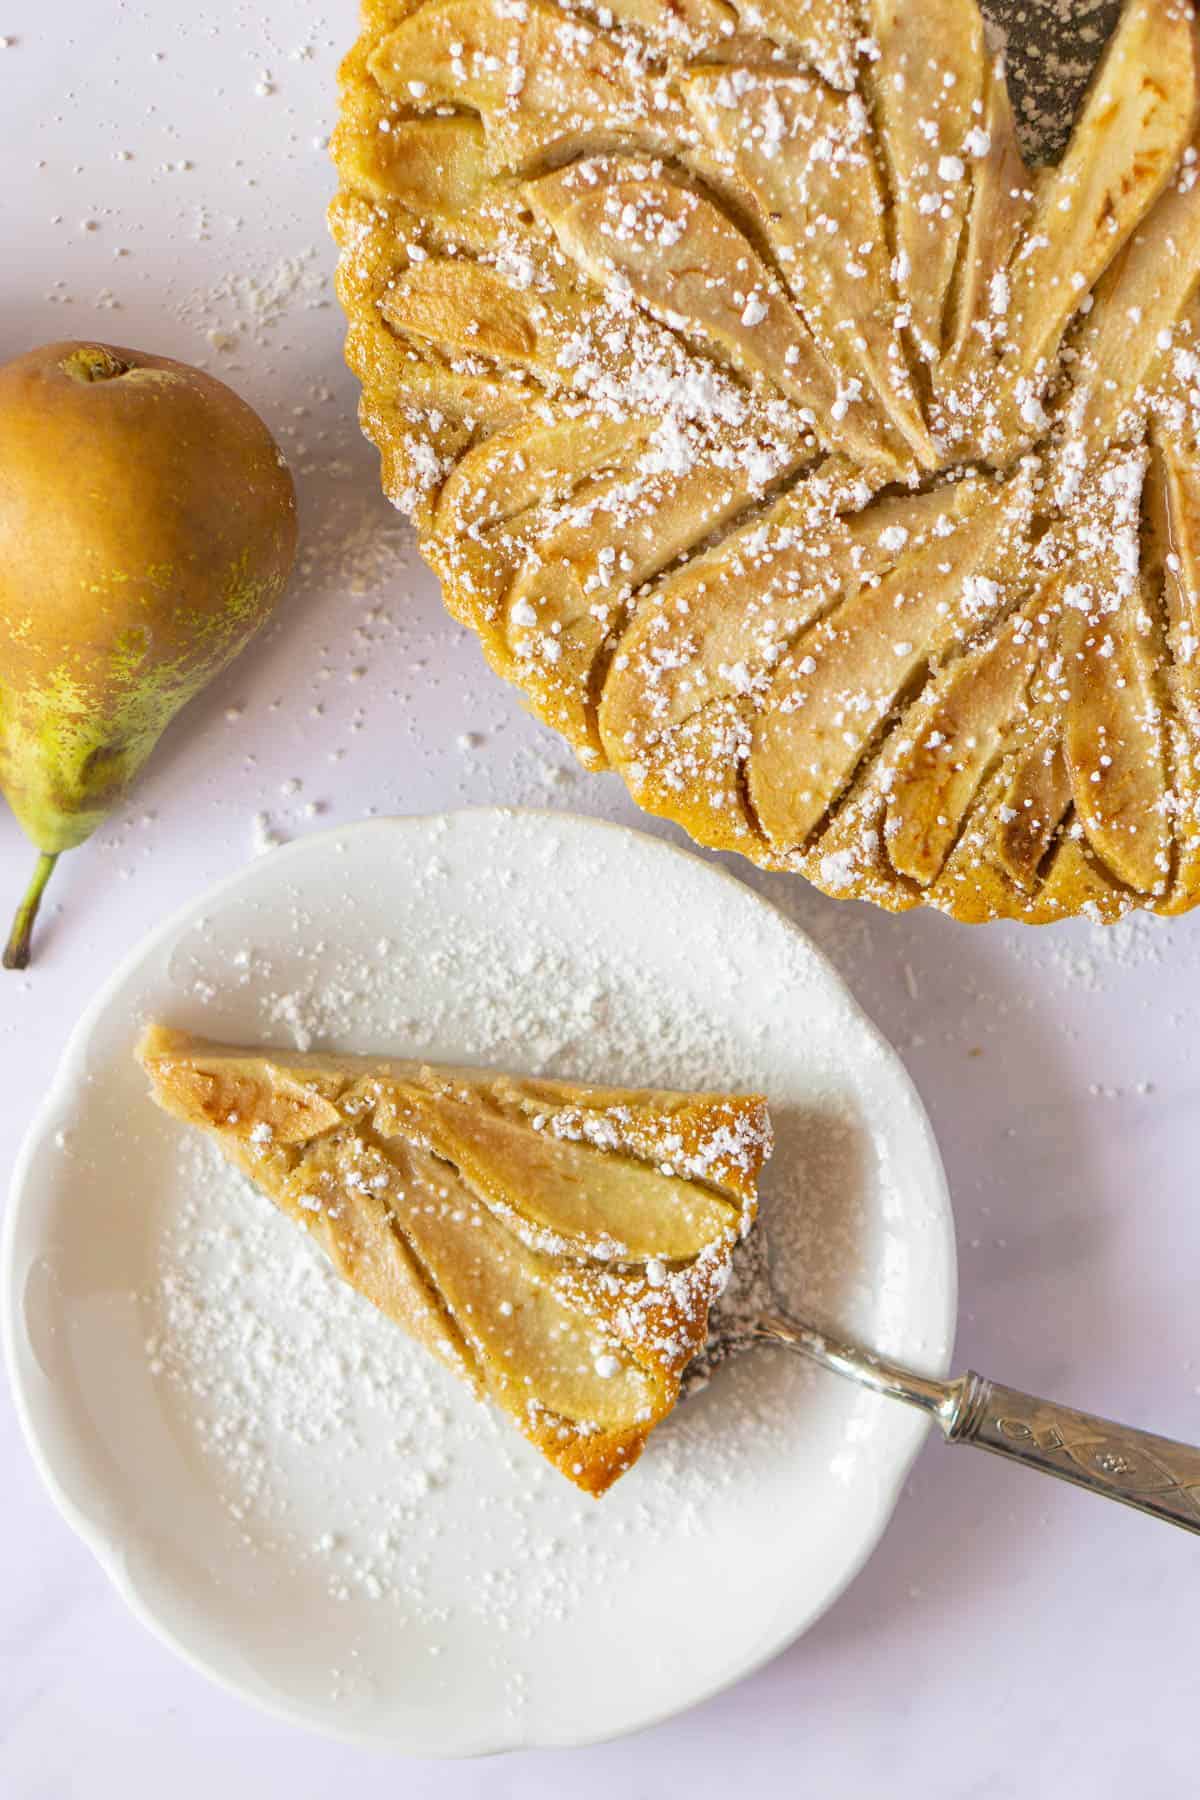 Pear tart slice on a white dish with rest of tart in the background and a pear on the side.